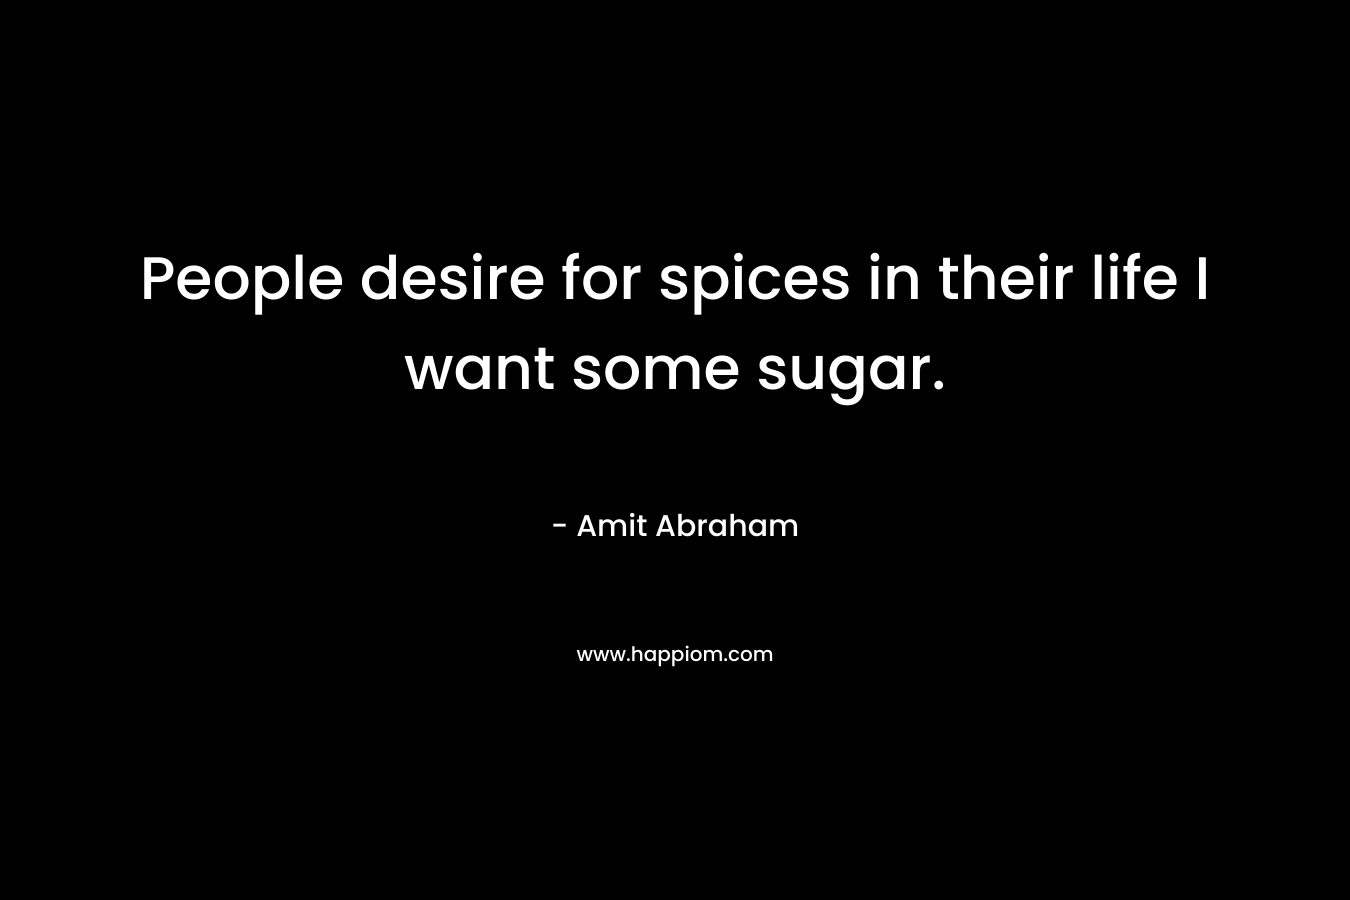 People desire for spices in their life I want some sugar.